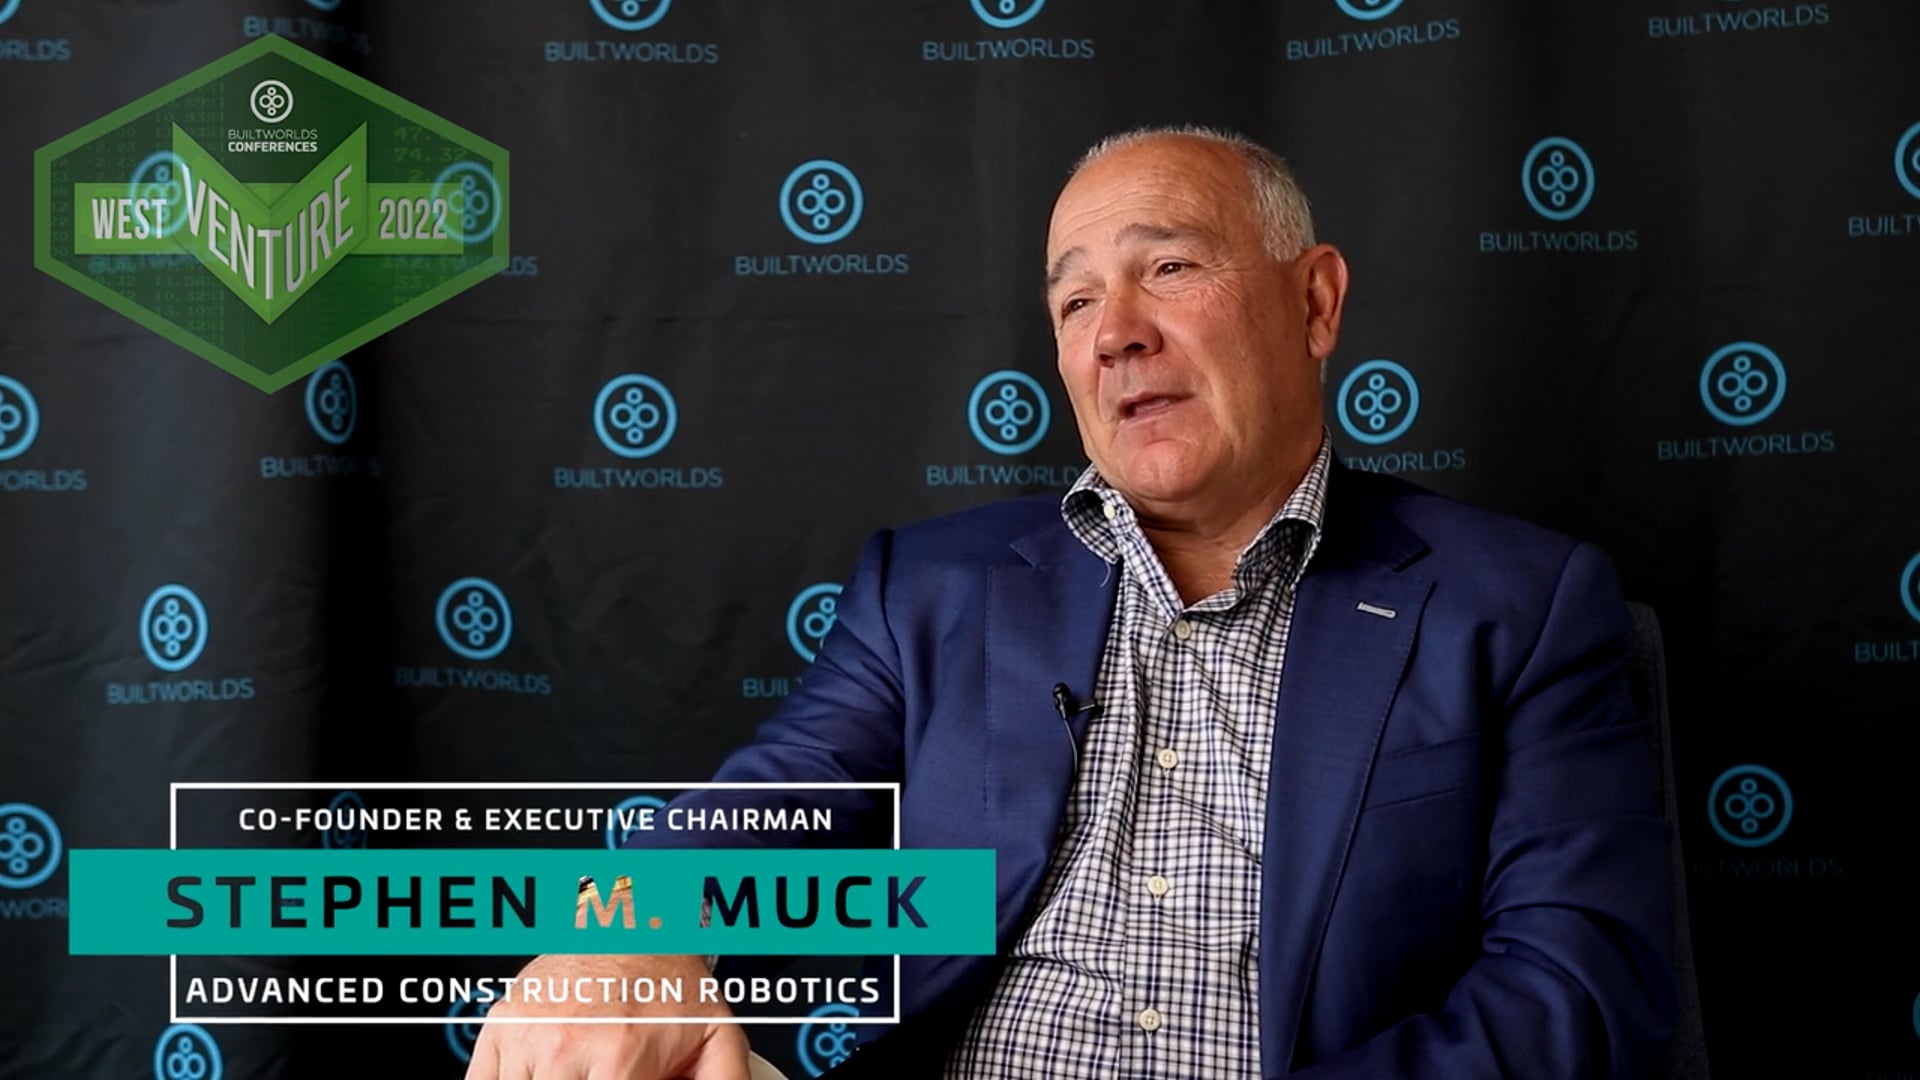 BuiltWorlds Session Interview - Stephen Muck, Co-Founder & Executive Chairman, Advanced Construction Robotics